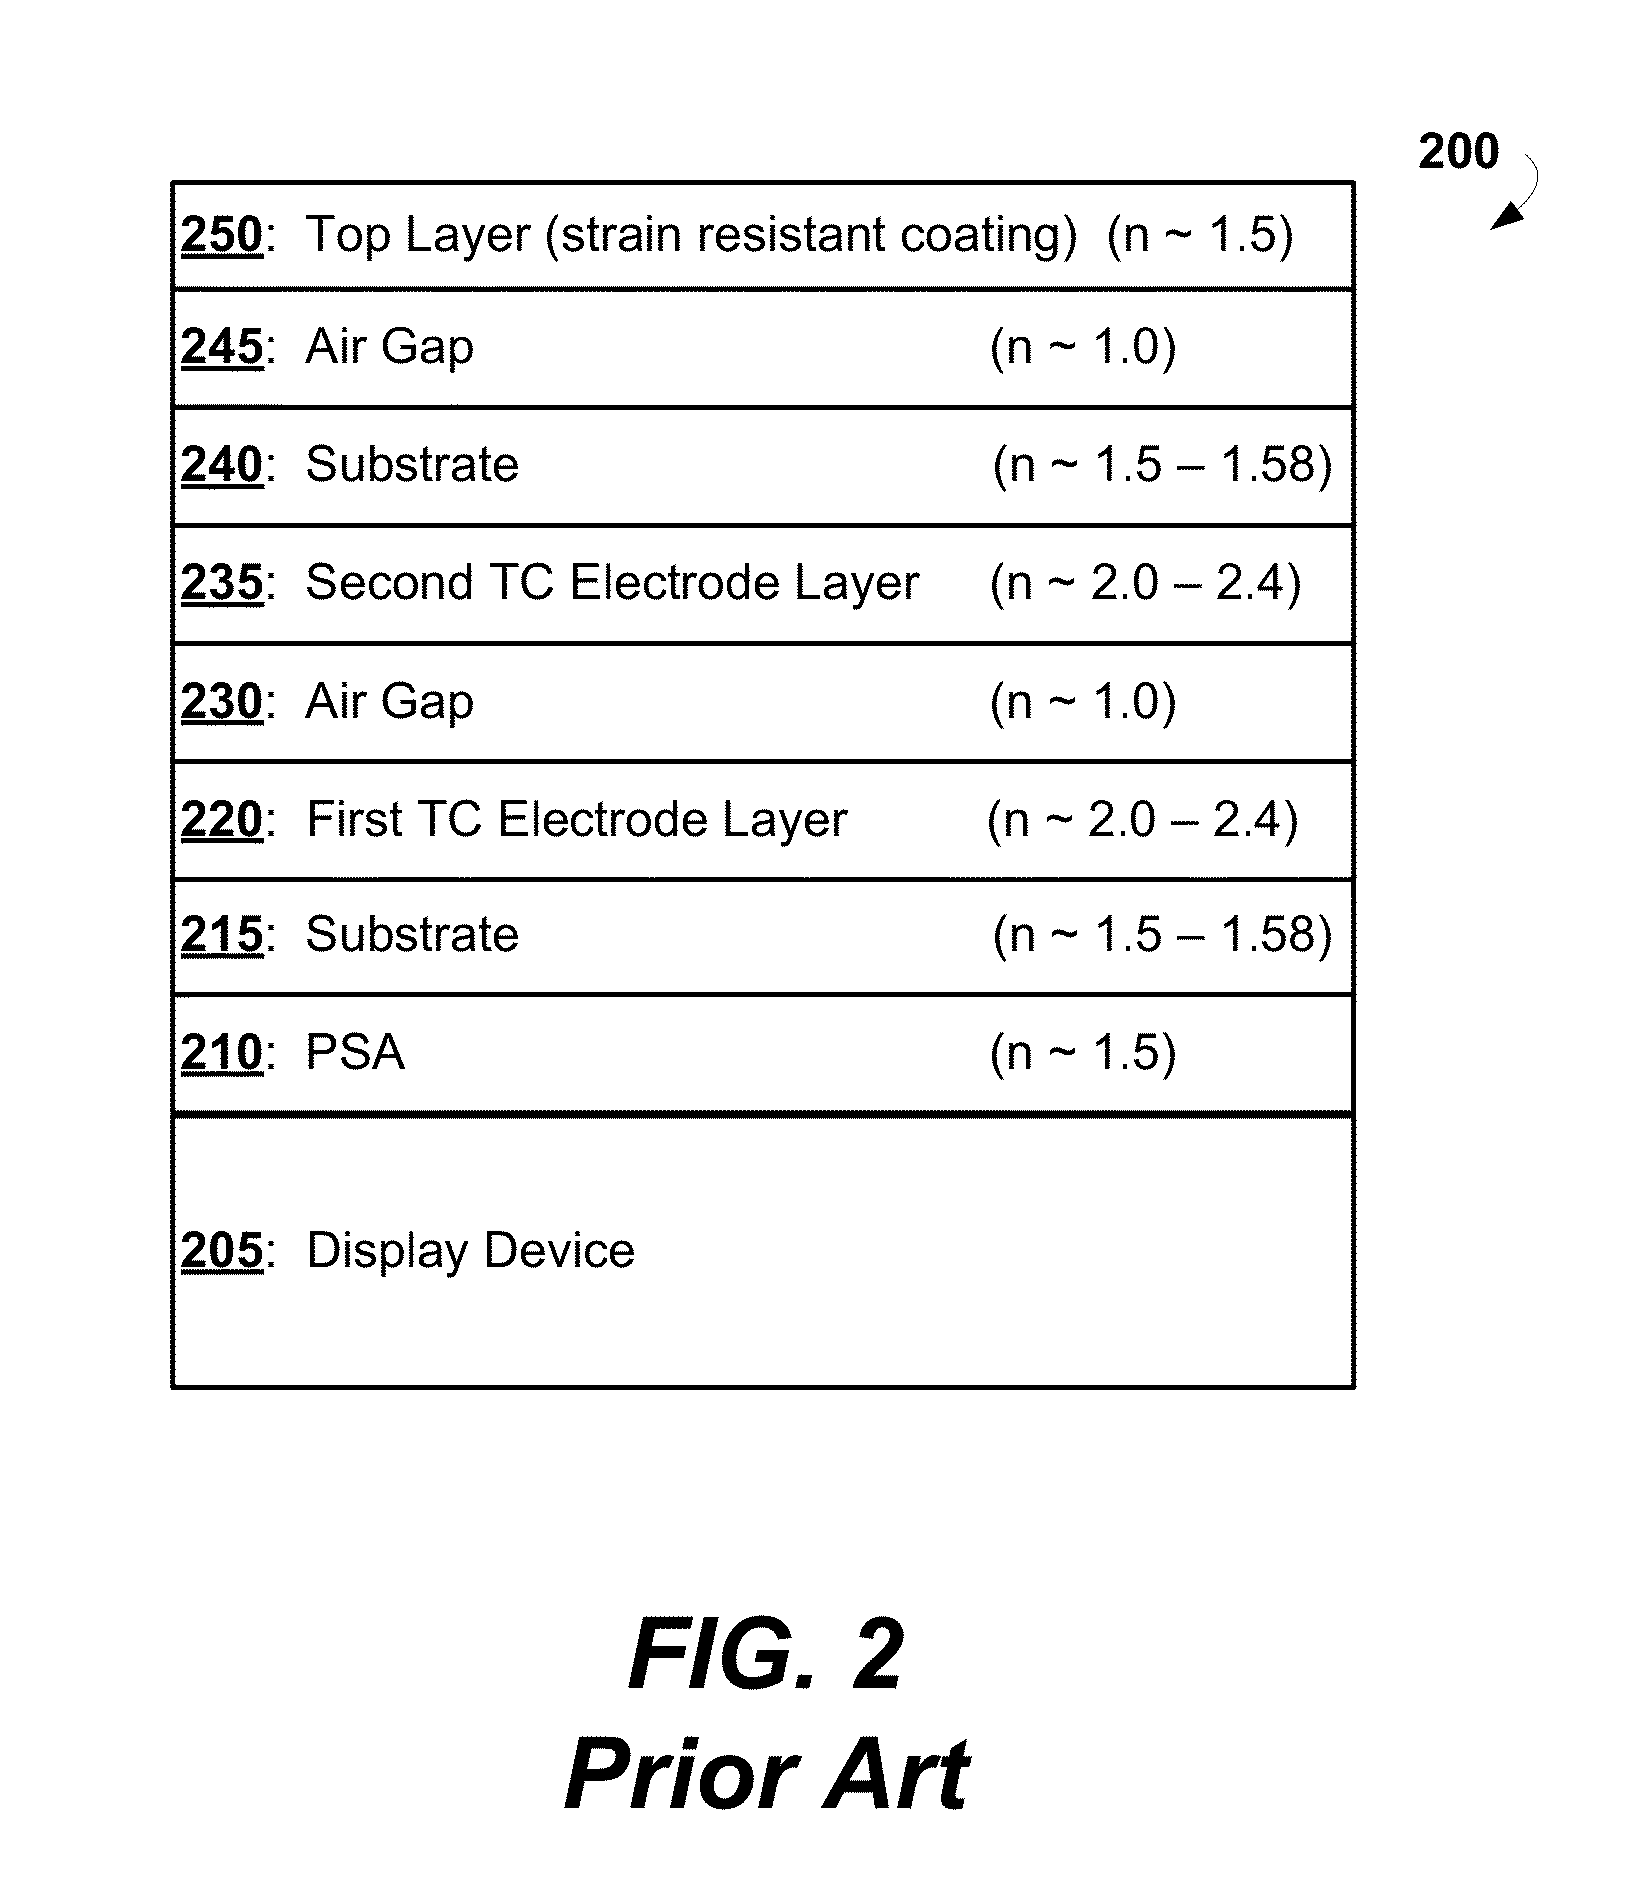 Index matching and touch panel improvements in display devices